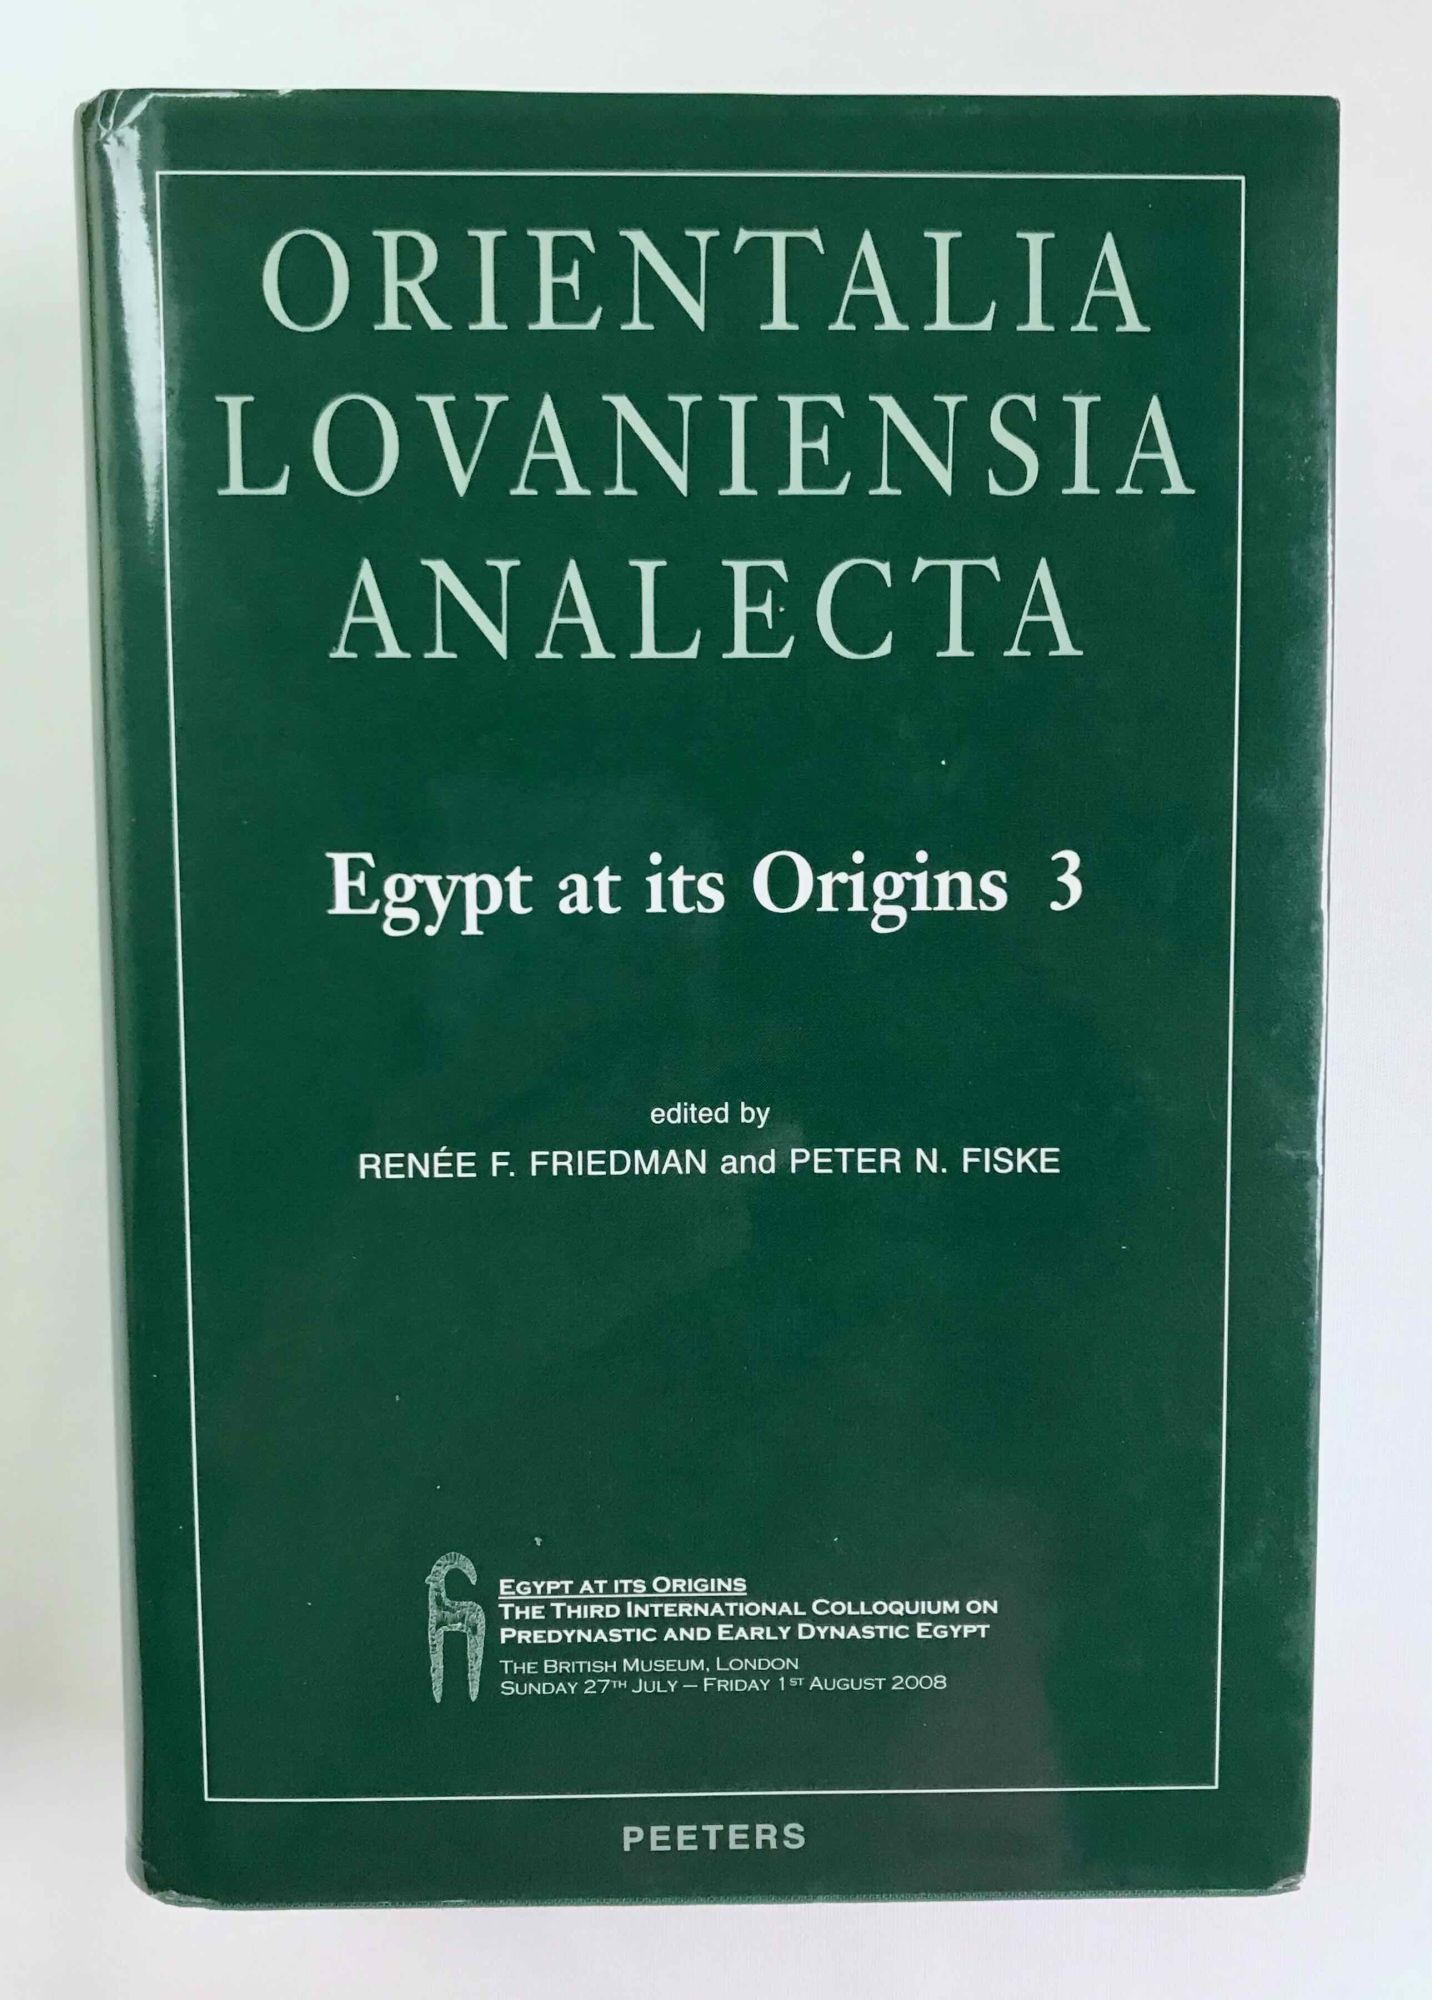 Egypt at its origins. Vol. III: Proceedings of the Third International Conference Origin of the State, Predynastic and Early Dynastic Egypt, London 27th July - 1st August 2008 - FRIEDMAN Renée F. - FISKE Peter N.